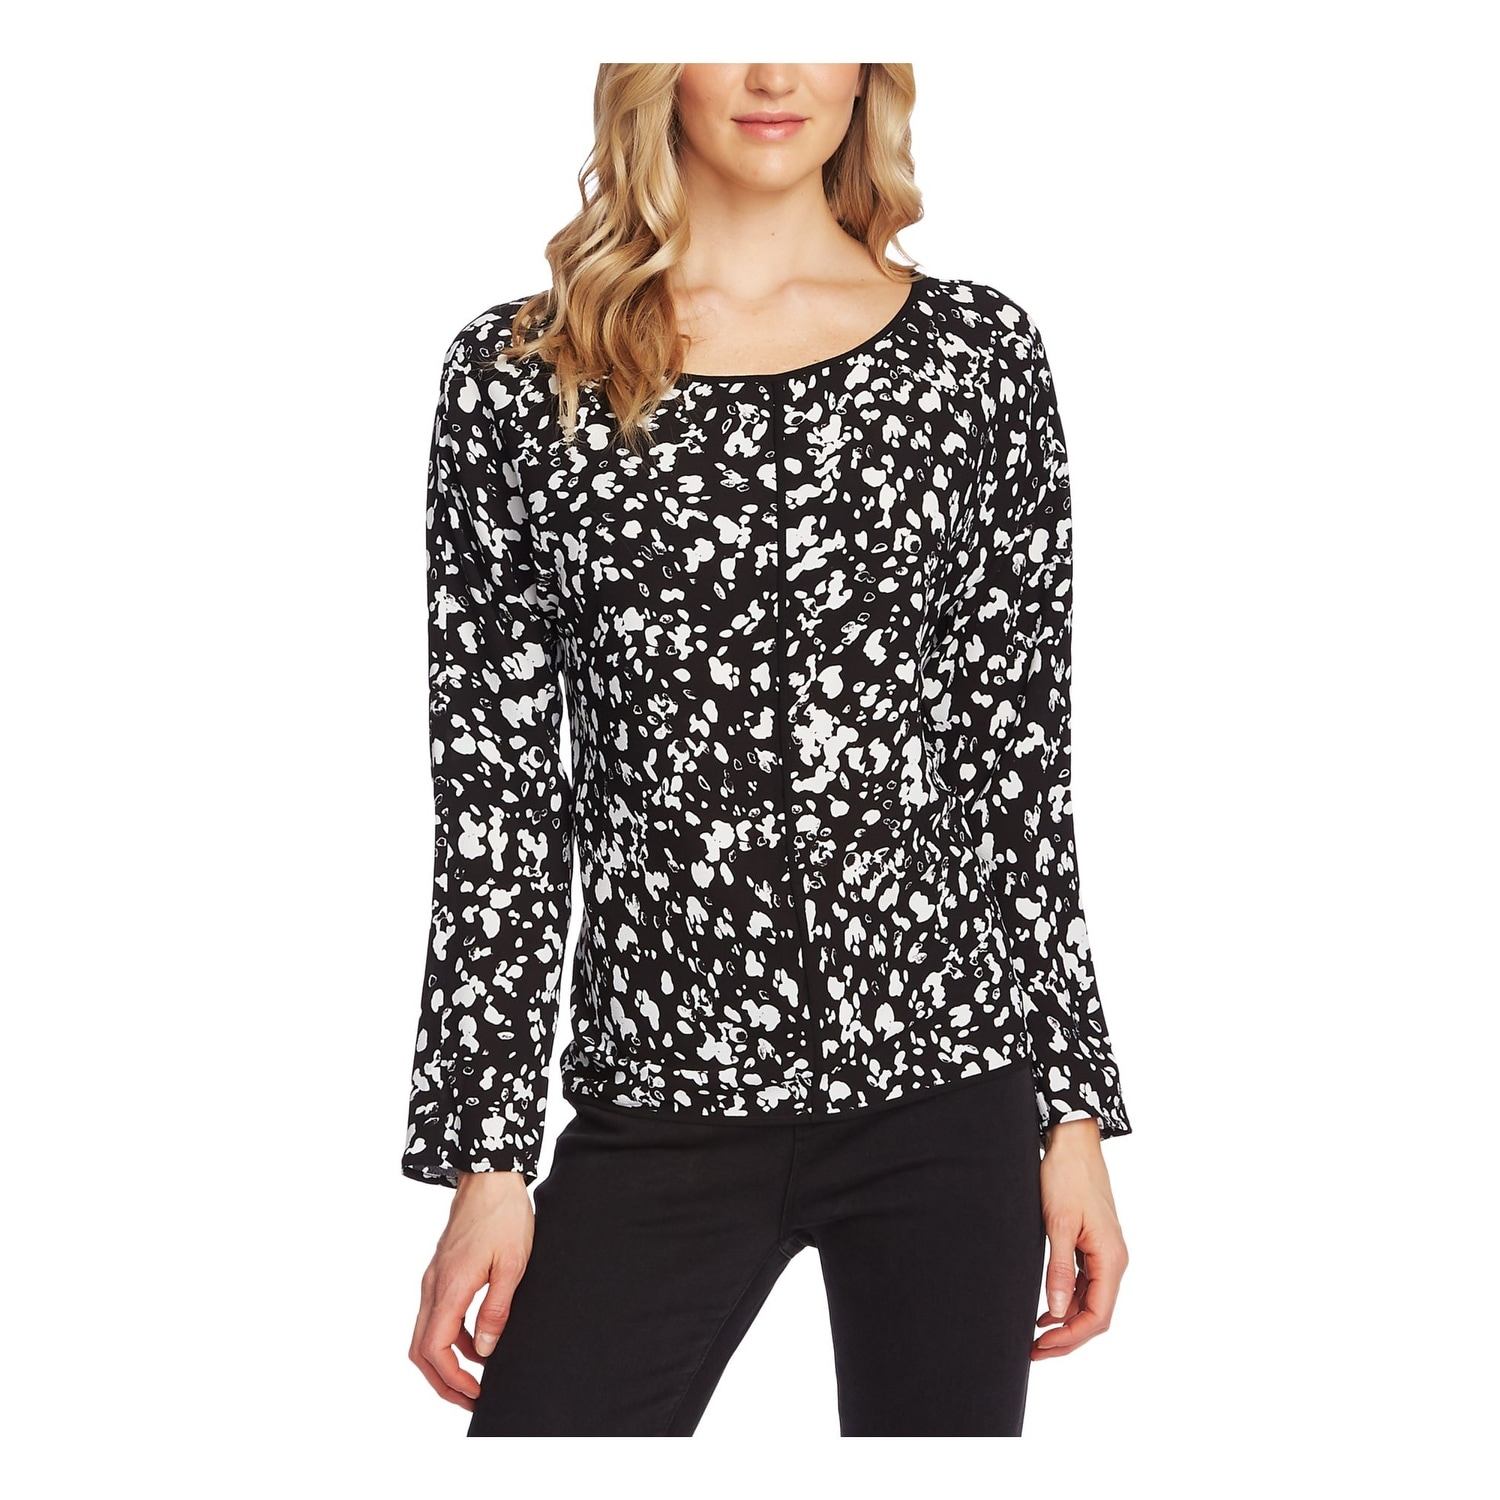 VINCE CAMUTO Womens Black Printed Long Sleeve Scoop Neck Top Size L